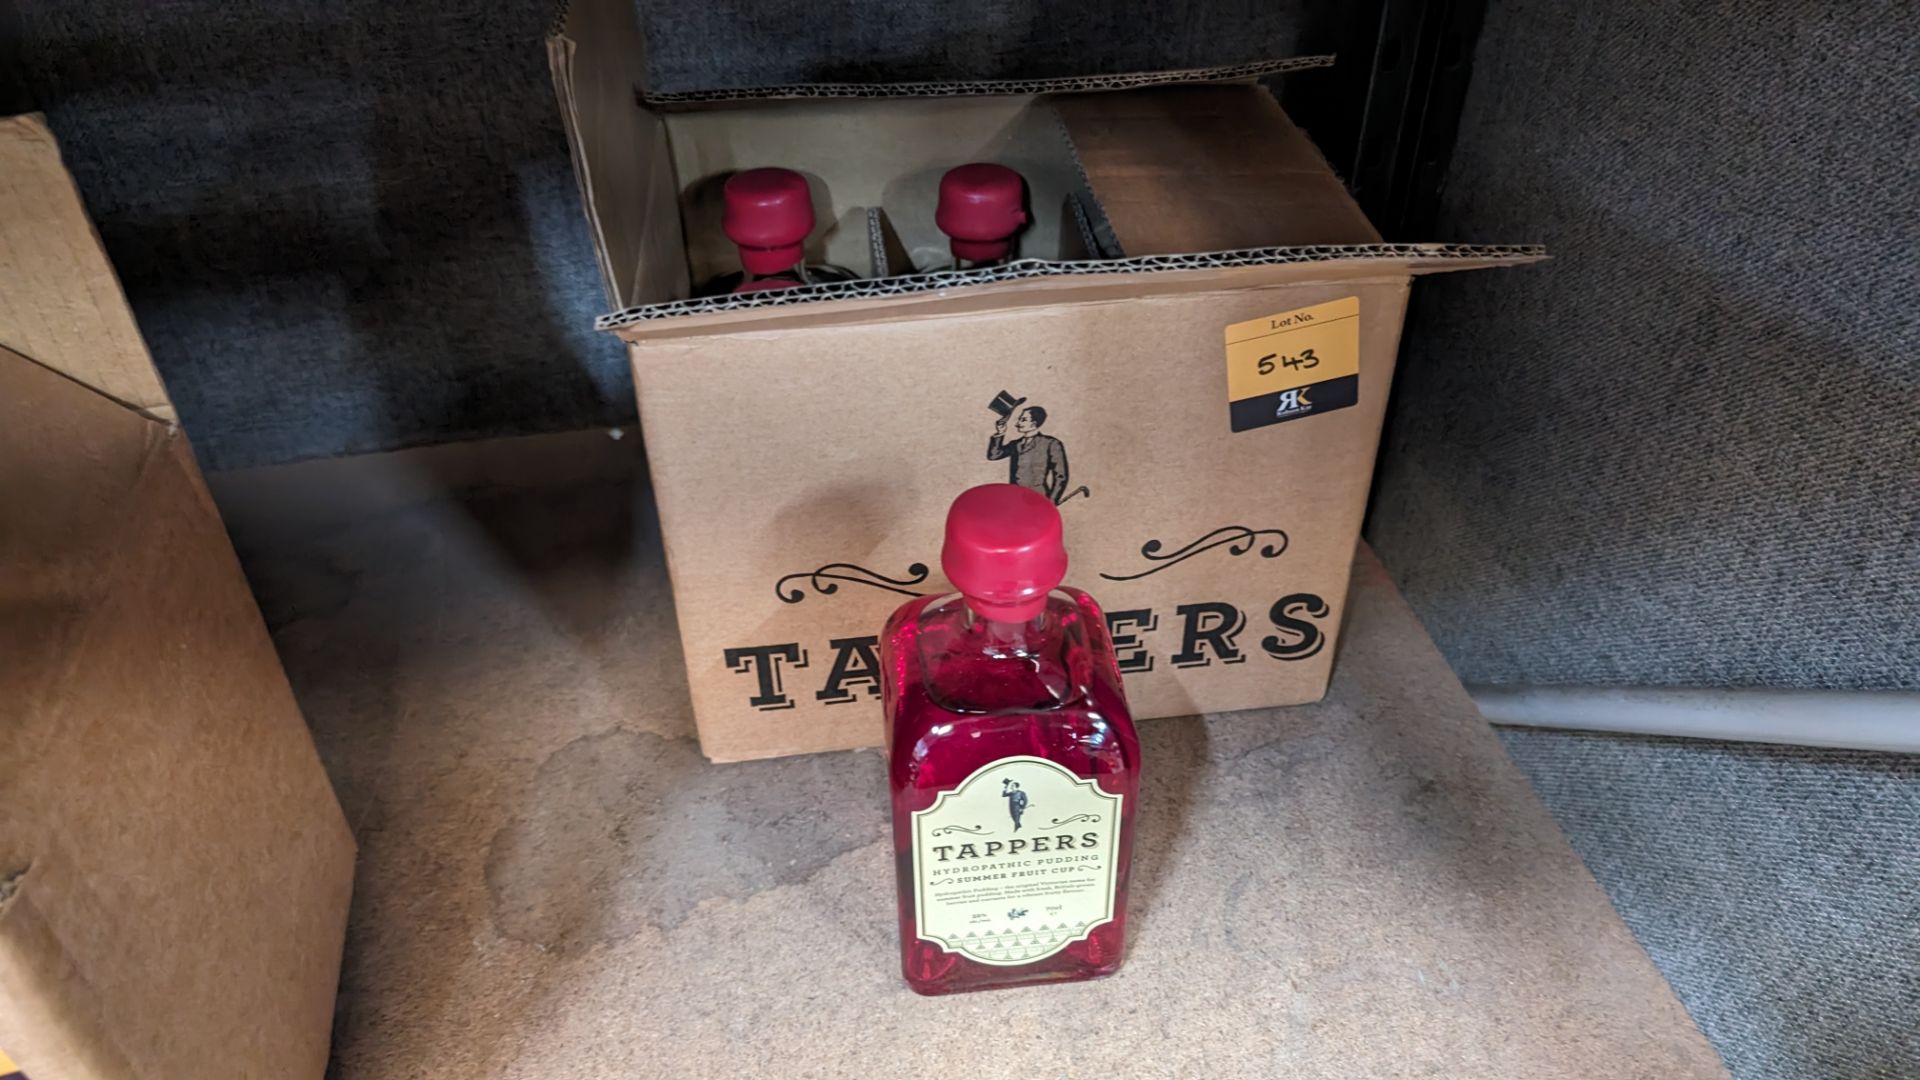 6 off 700ml bottles of Tappers Hydropathic Summer Fruit Cup, 32% ABV. Includes a Tappers presenta - Image 2 of 5